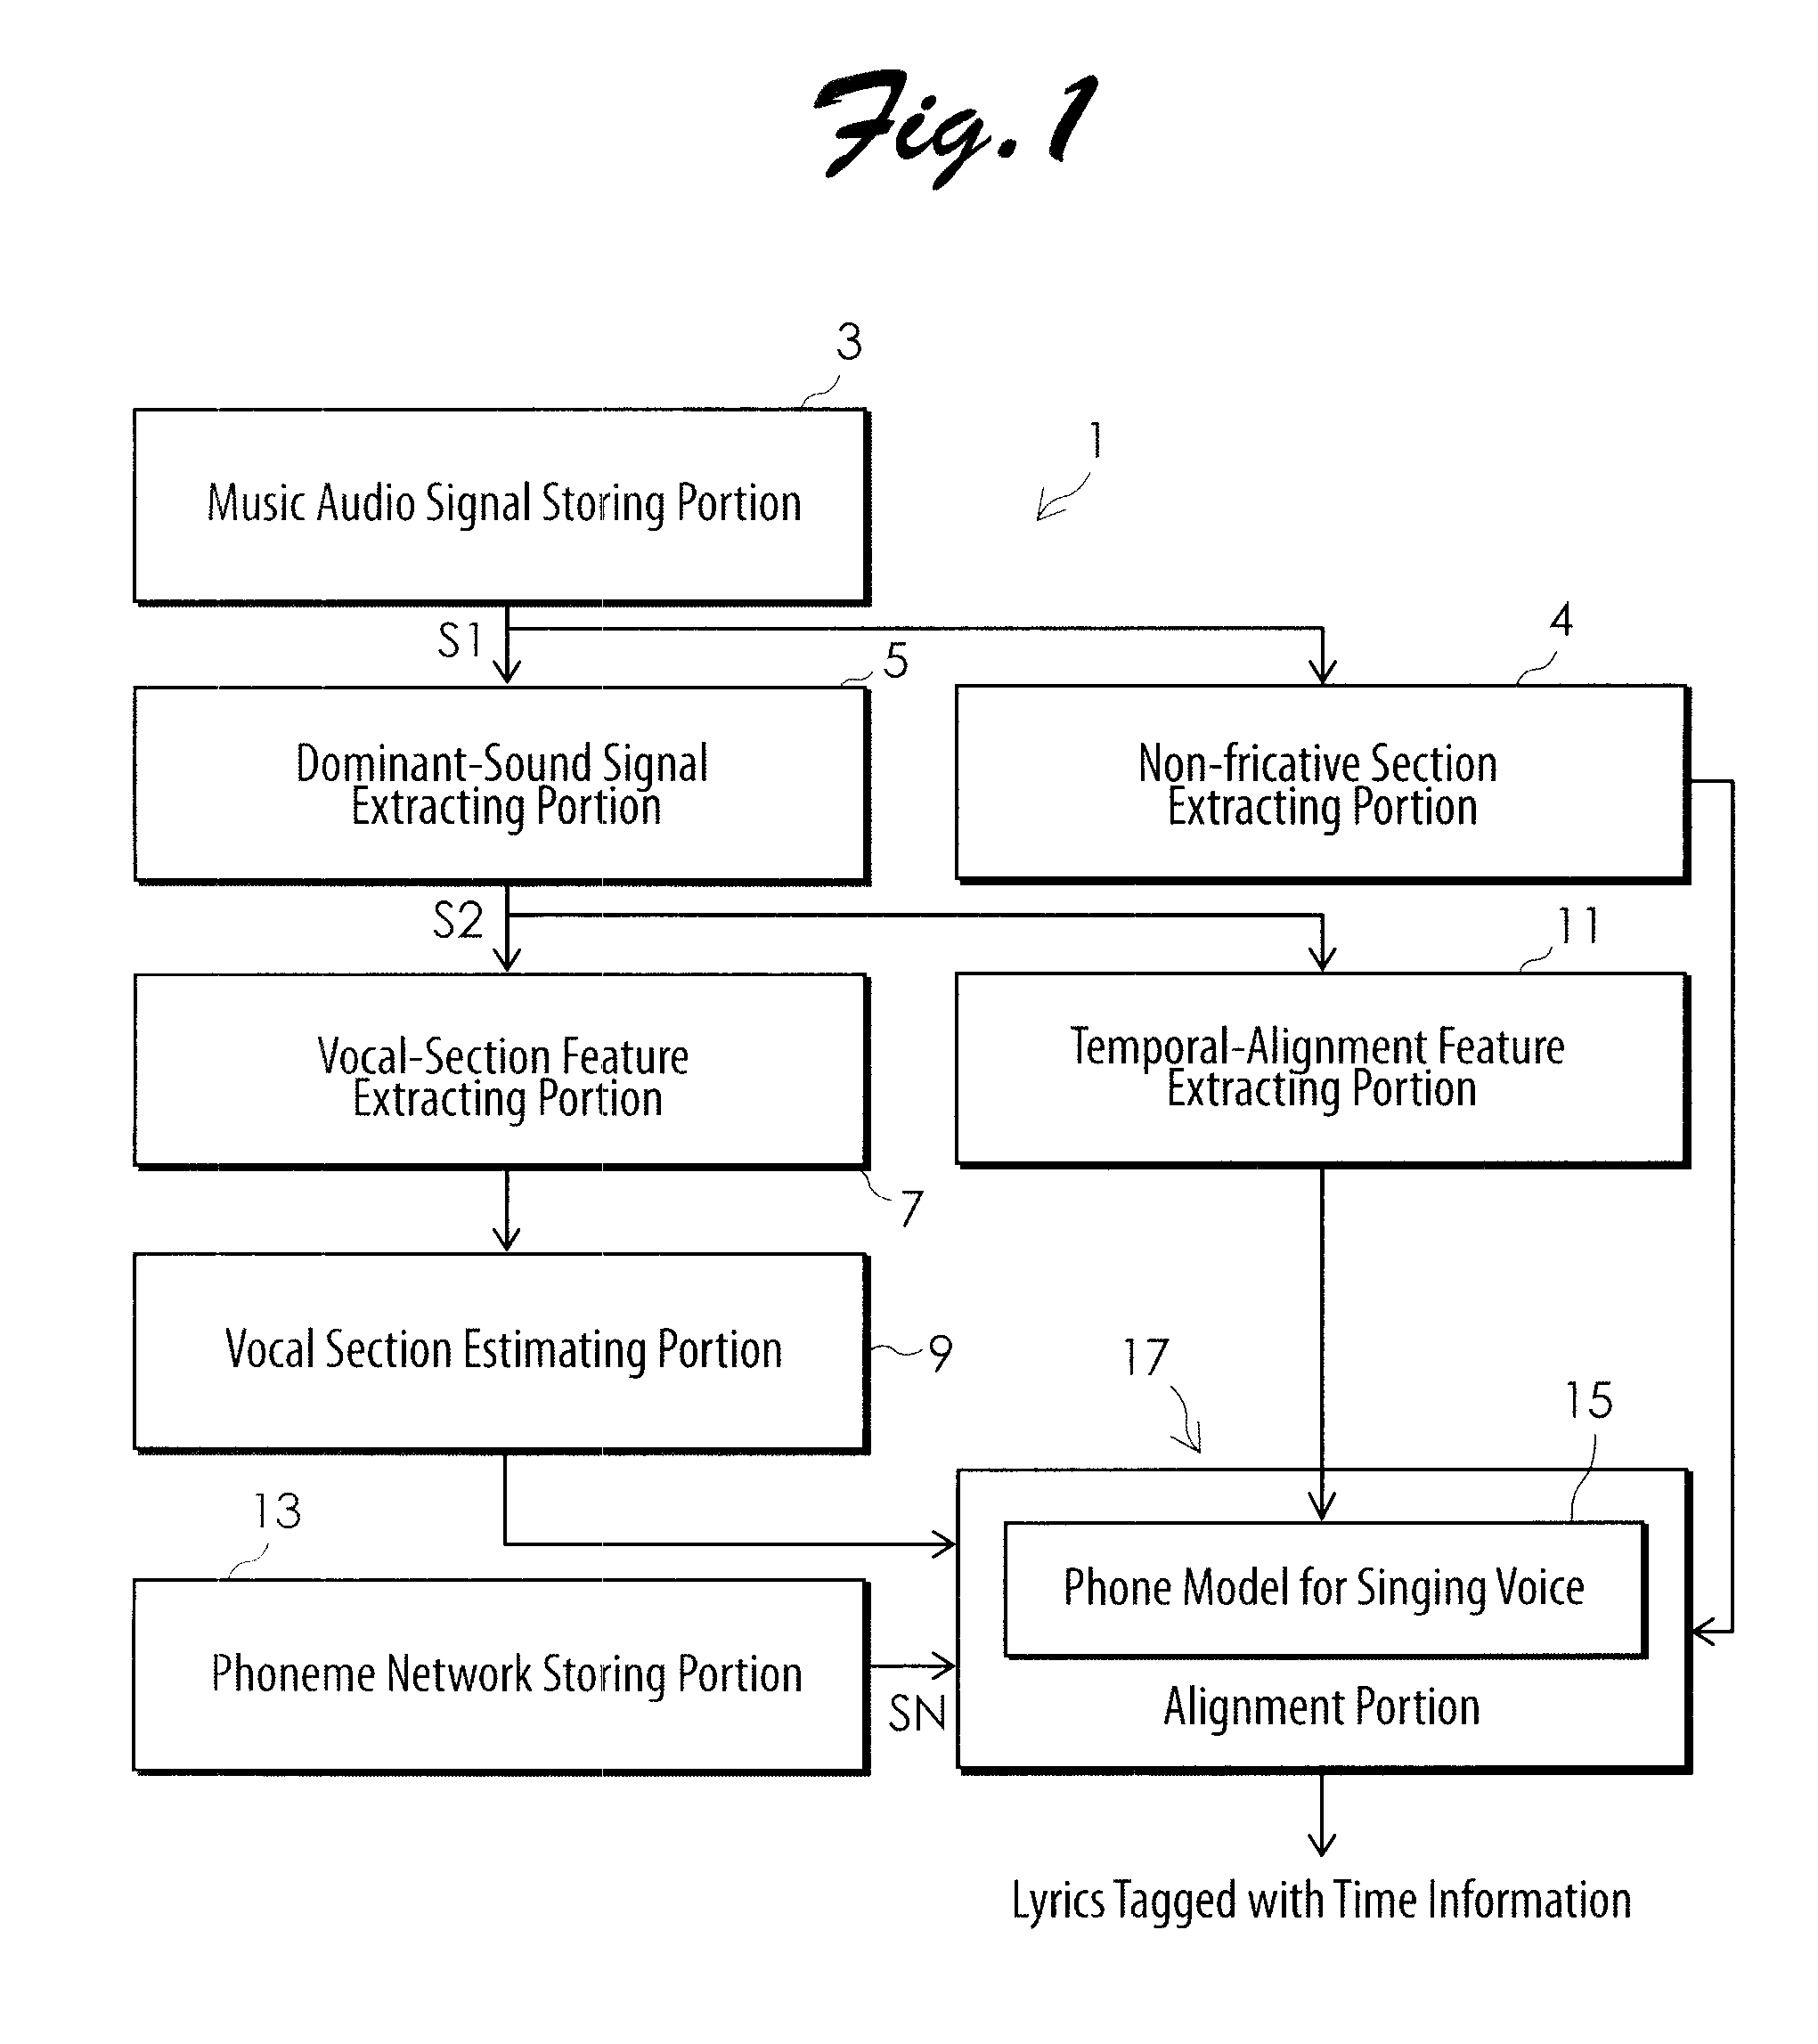 System and method for automatic temporal adjustment between music audio signal and lyrics